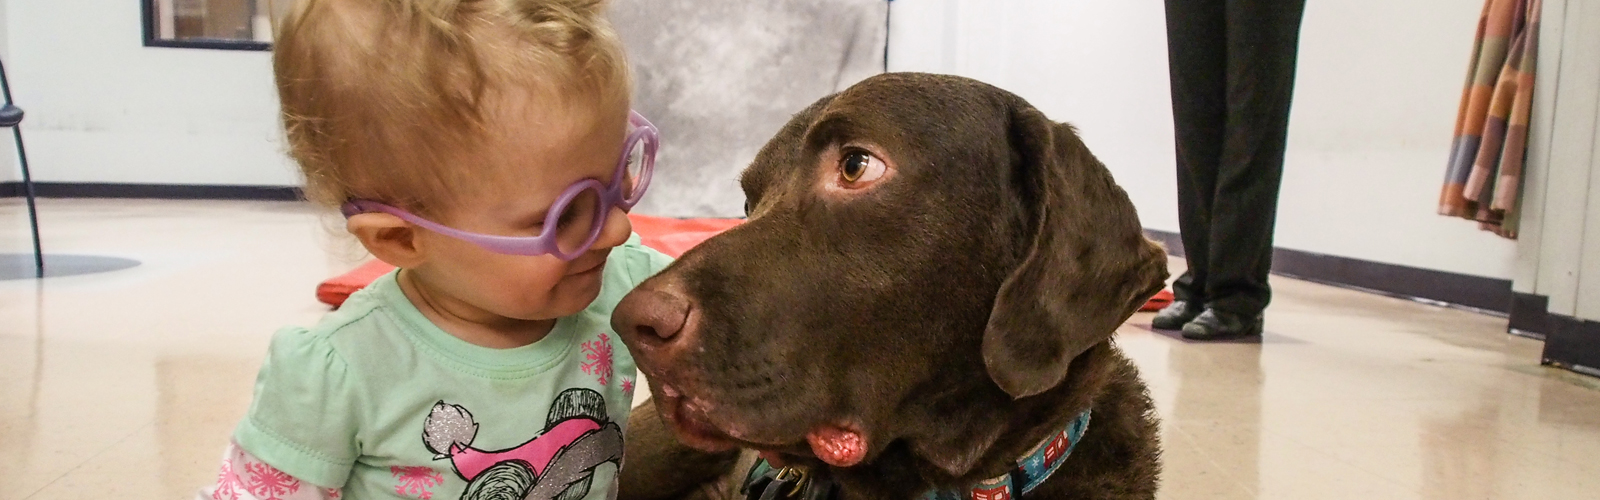 A child interacts with a dog during therapy.